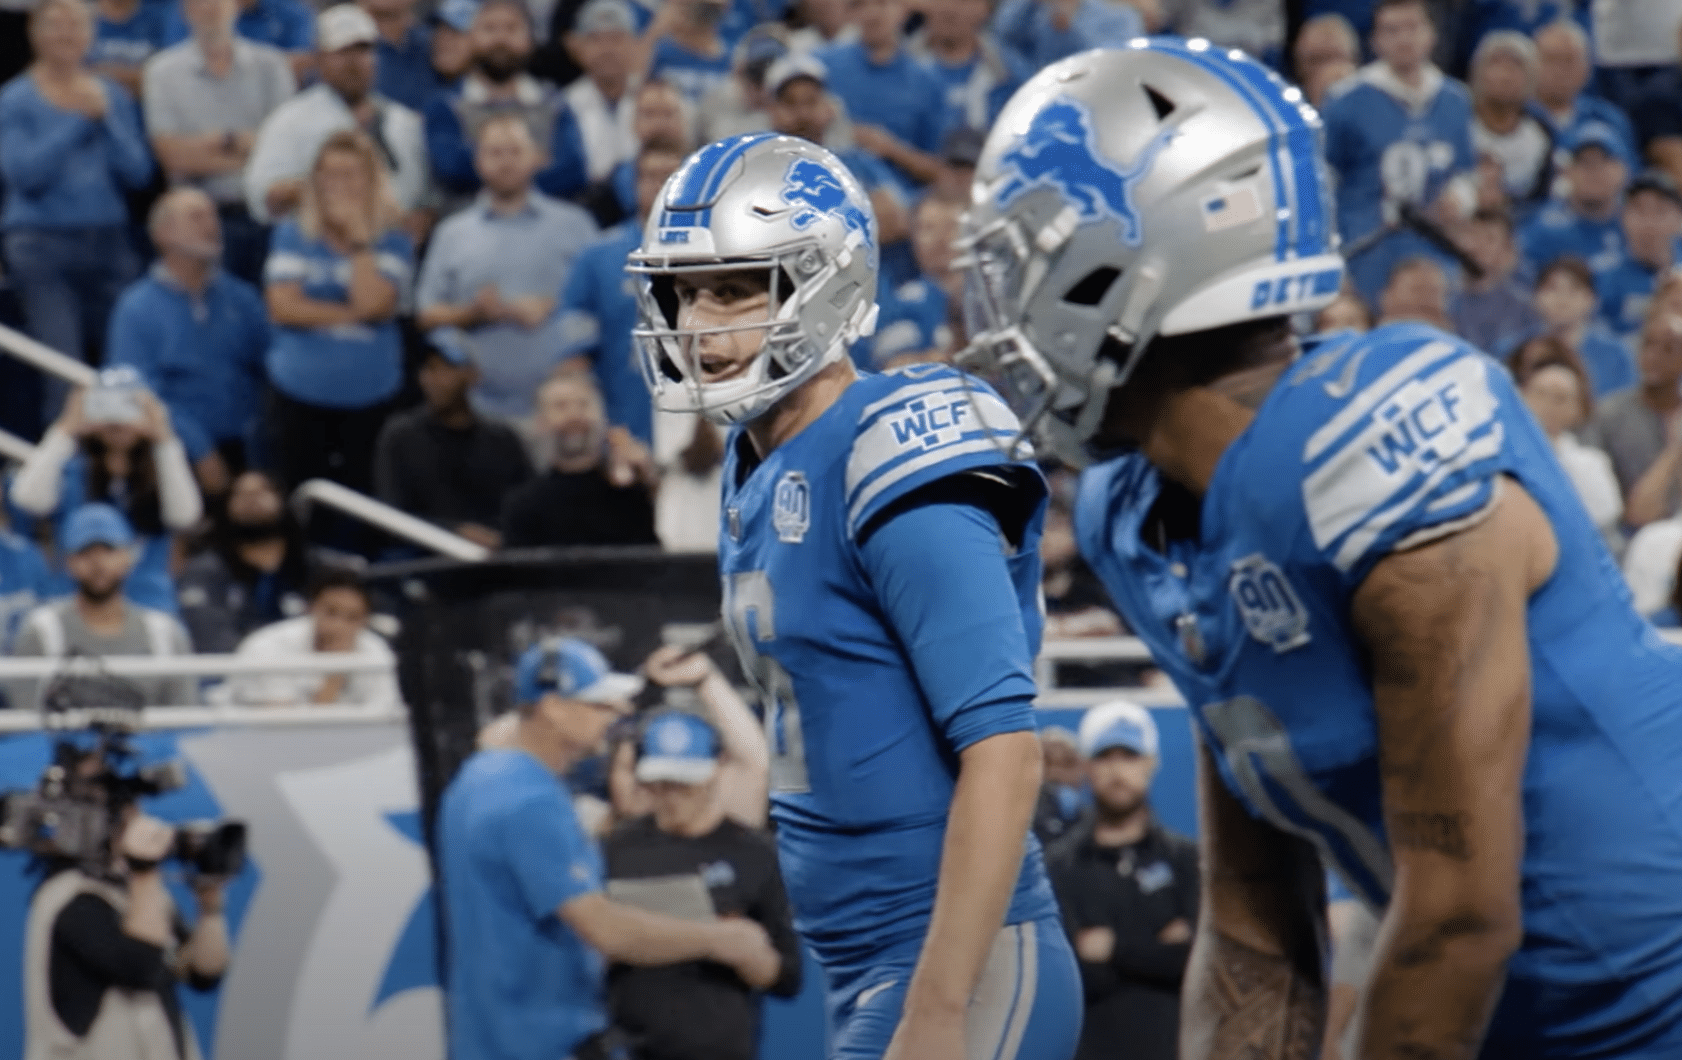 Detroit Lions starting offense Is Jared Goff An MVP Candidate Detroit Lions PFF Grades vs. Raiders Jared Goff may have to wait Update: Jared Goff Contract Extension Talks With Detroit Lions